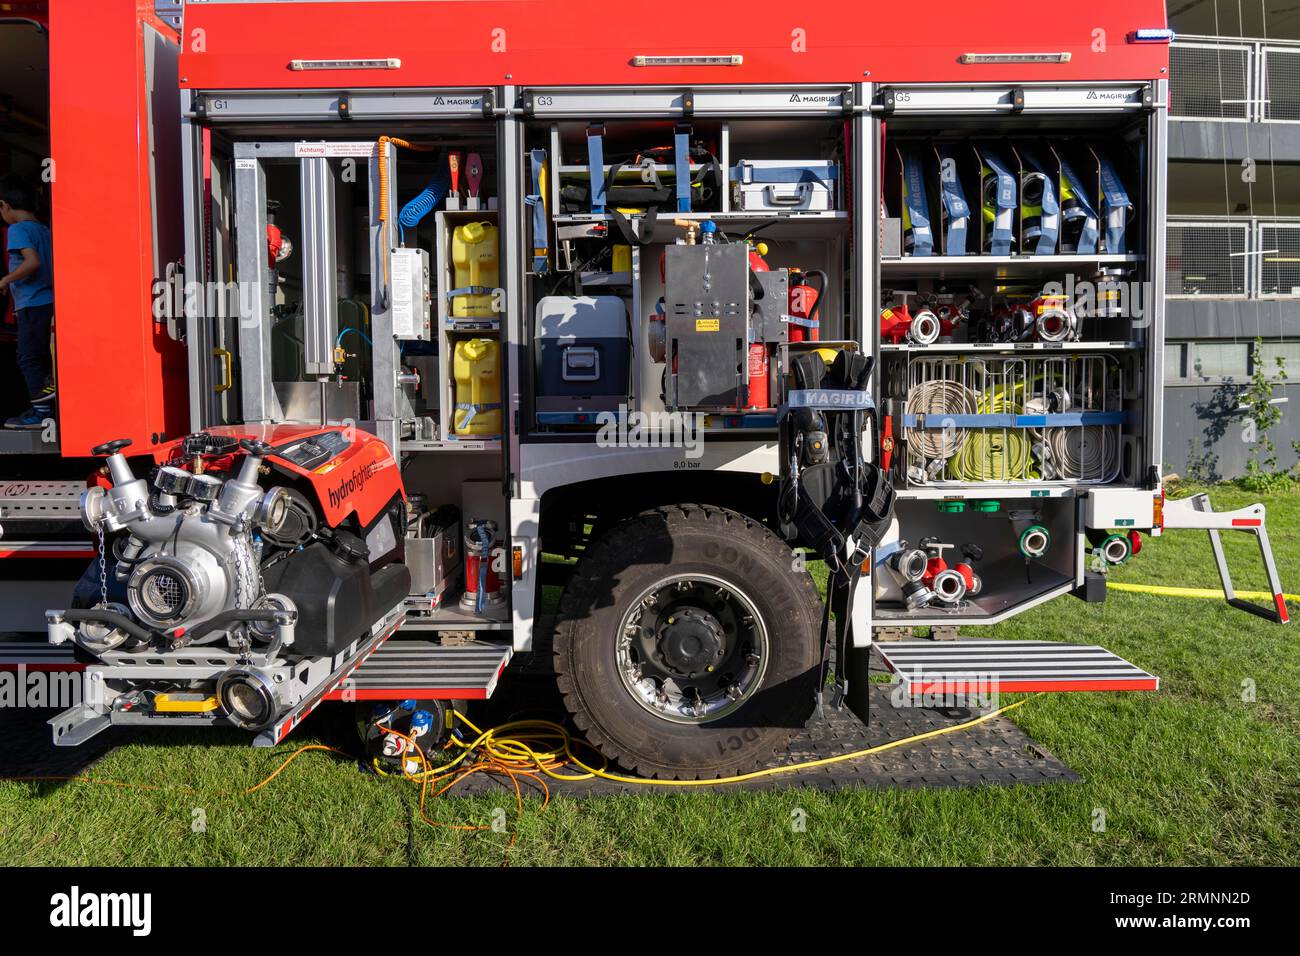 Fire brigade vehicle, fire engine, detail, equipment, disaster control, Stock Photo